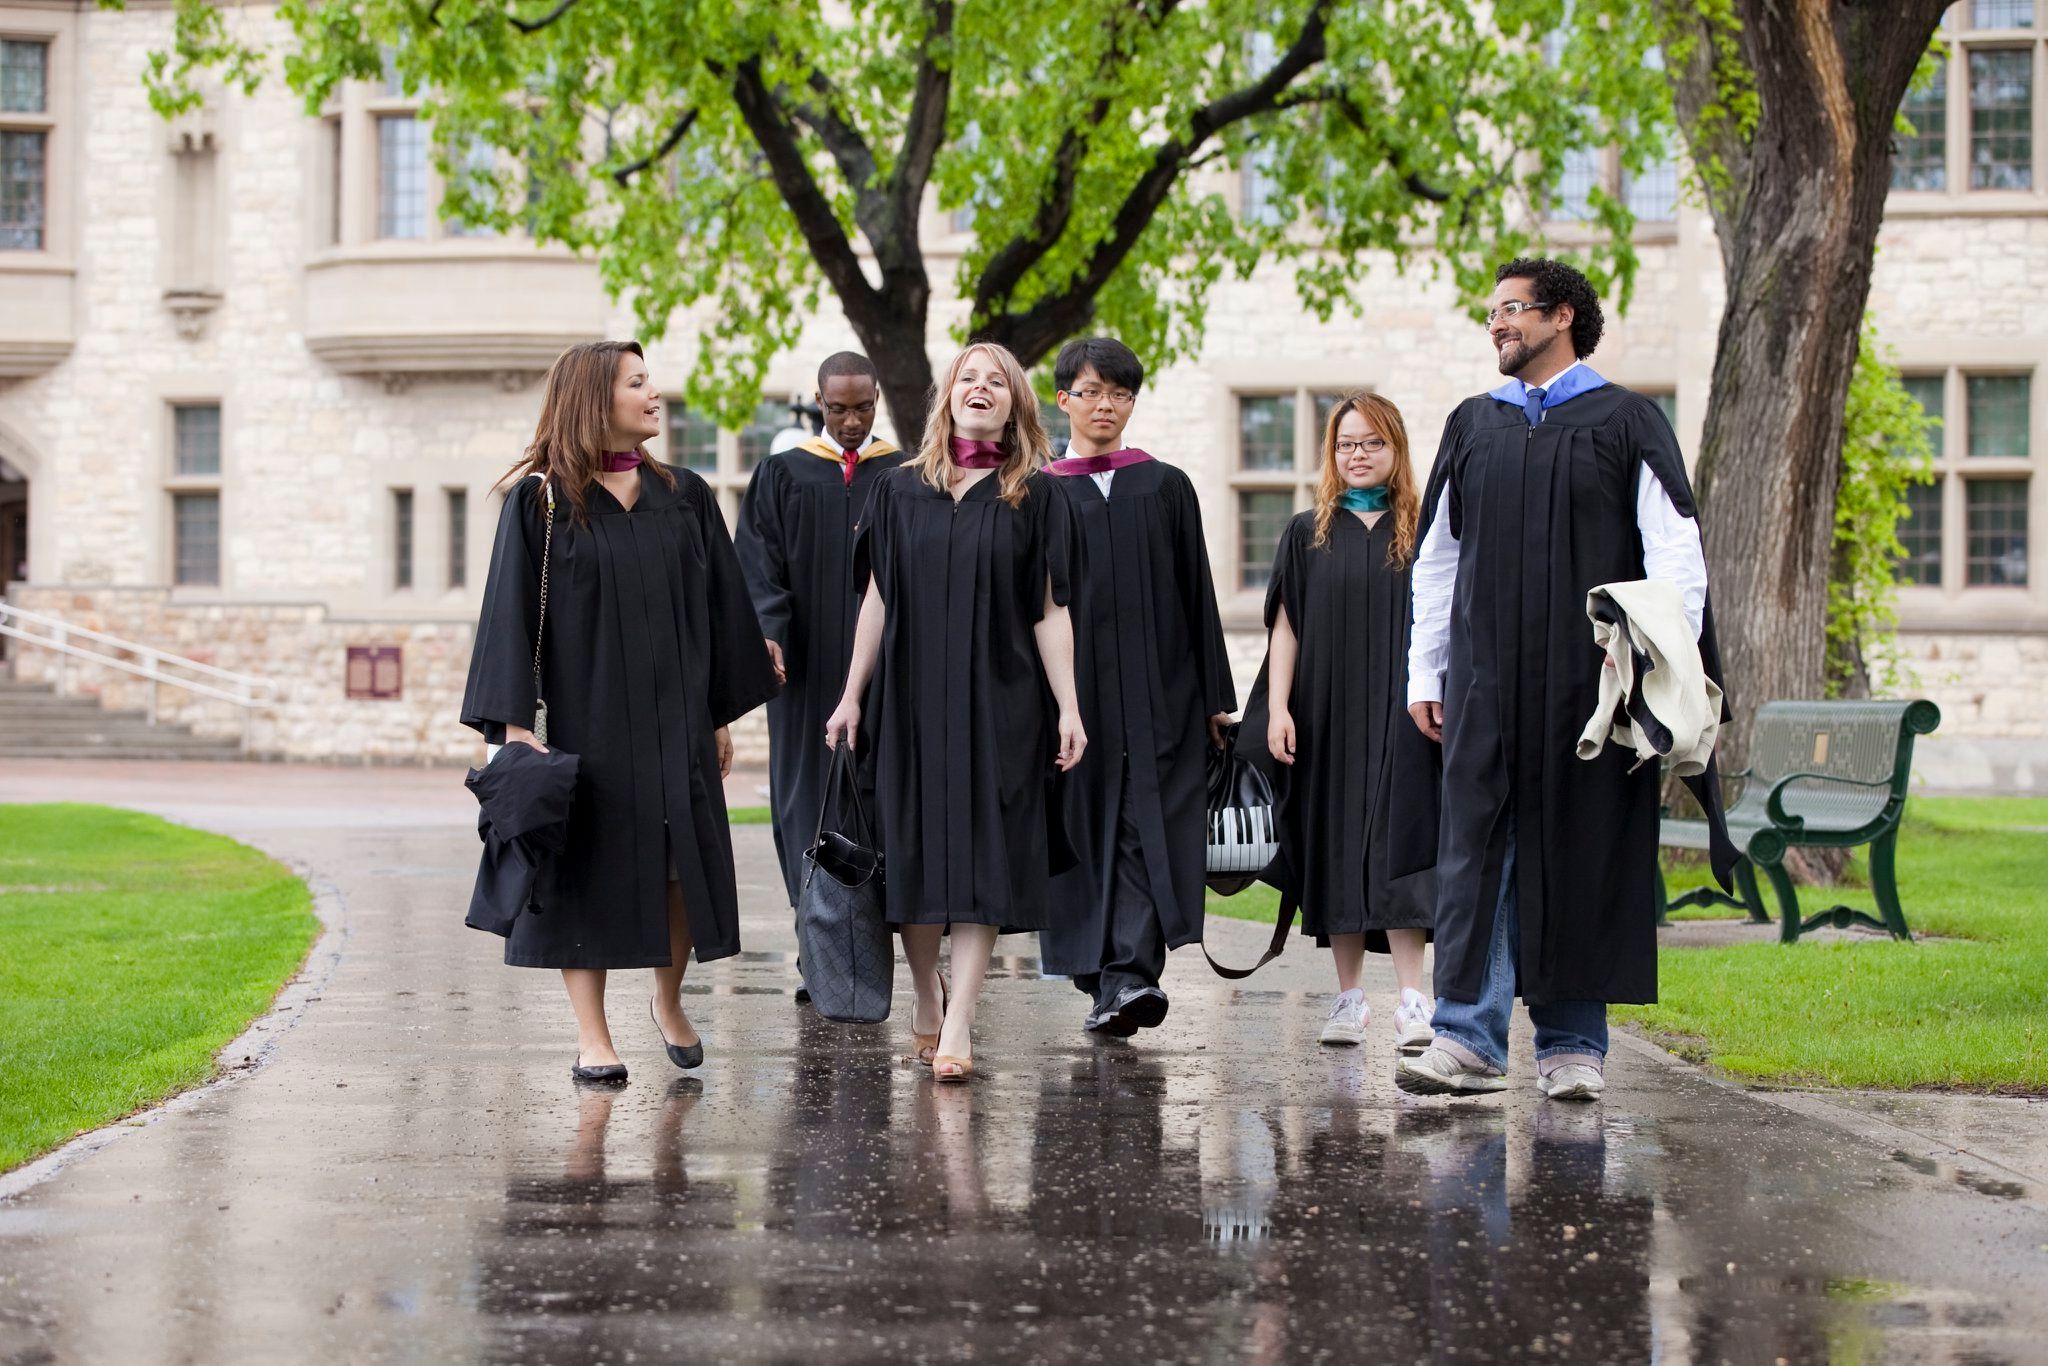 A photo of six young people of different ethnicities, 3 males and 3 females, in graduation gowns walking on a university campus.